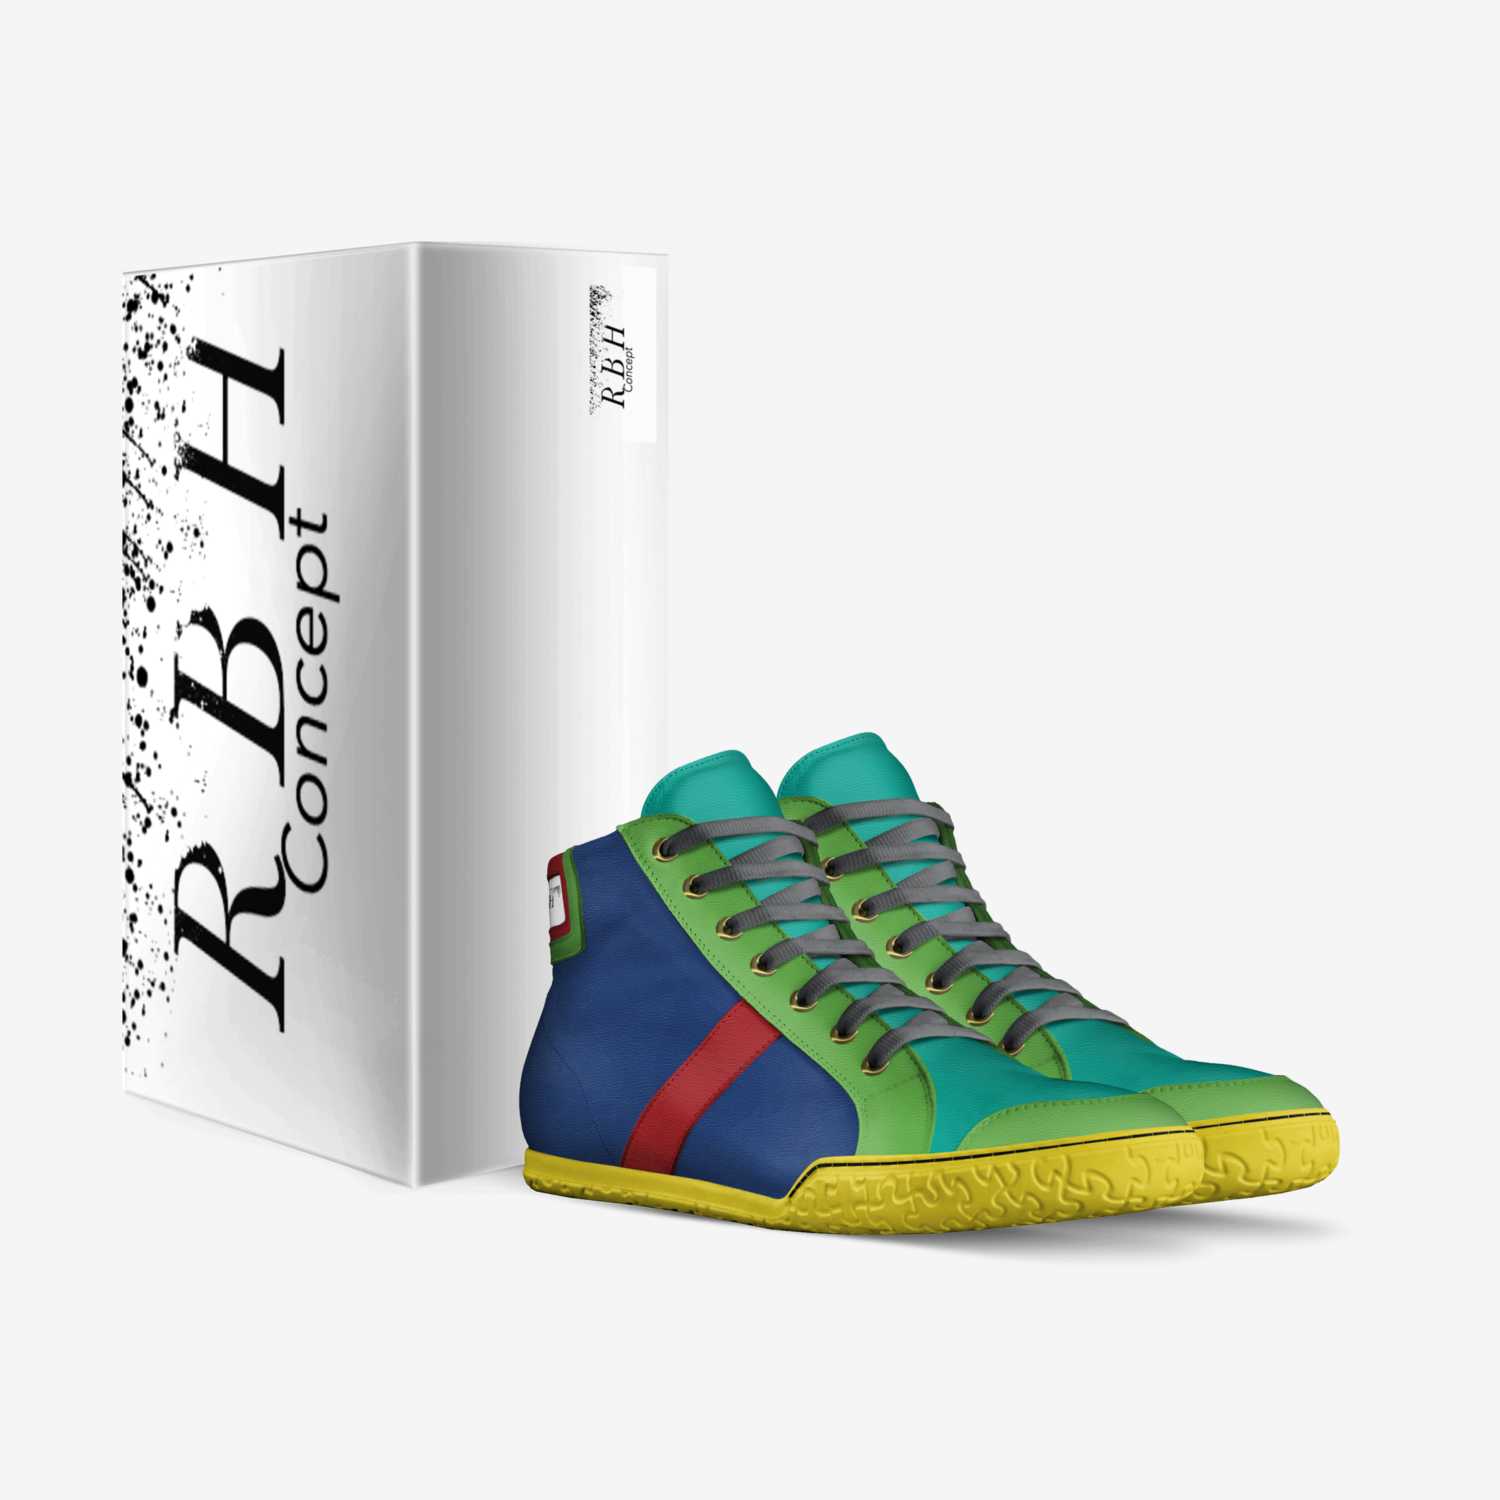 RBH concept custom made in Italy shoes by Obadiah Nelson | Box view